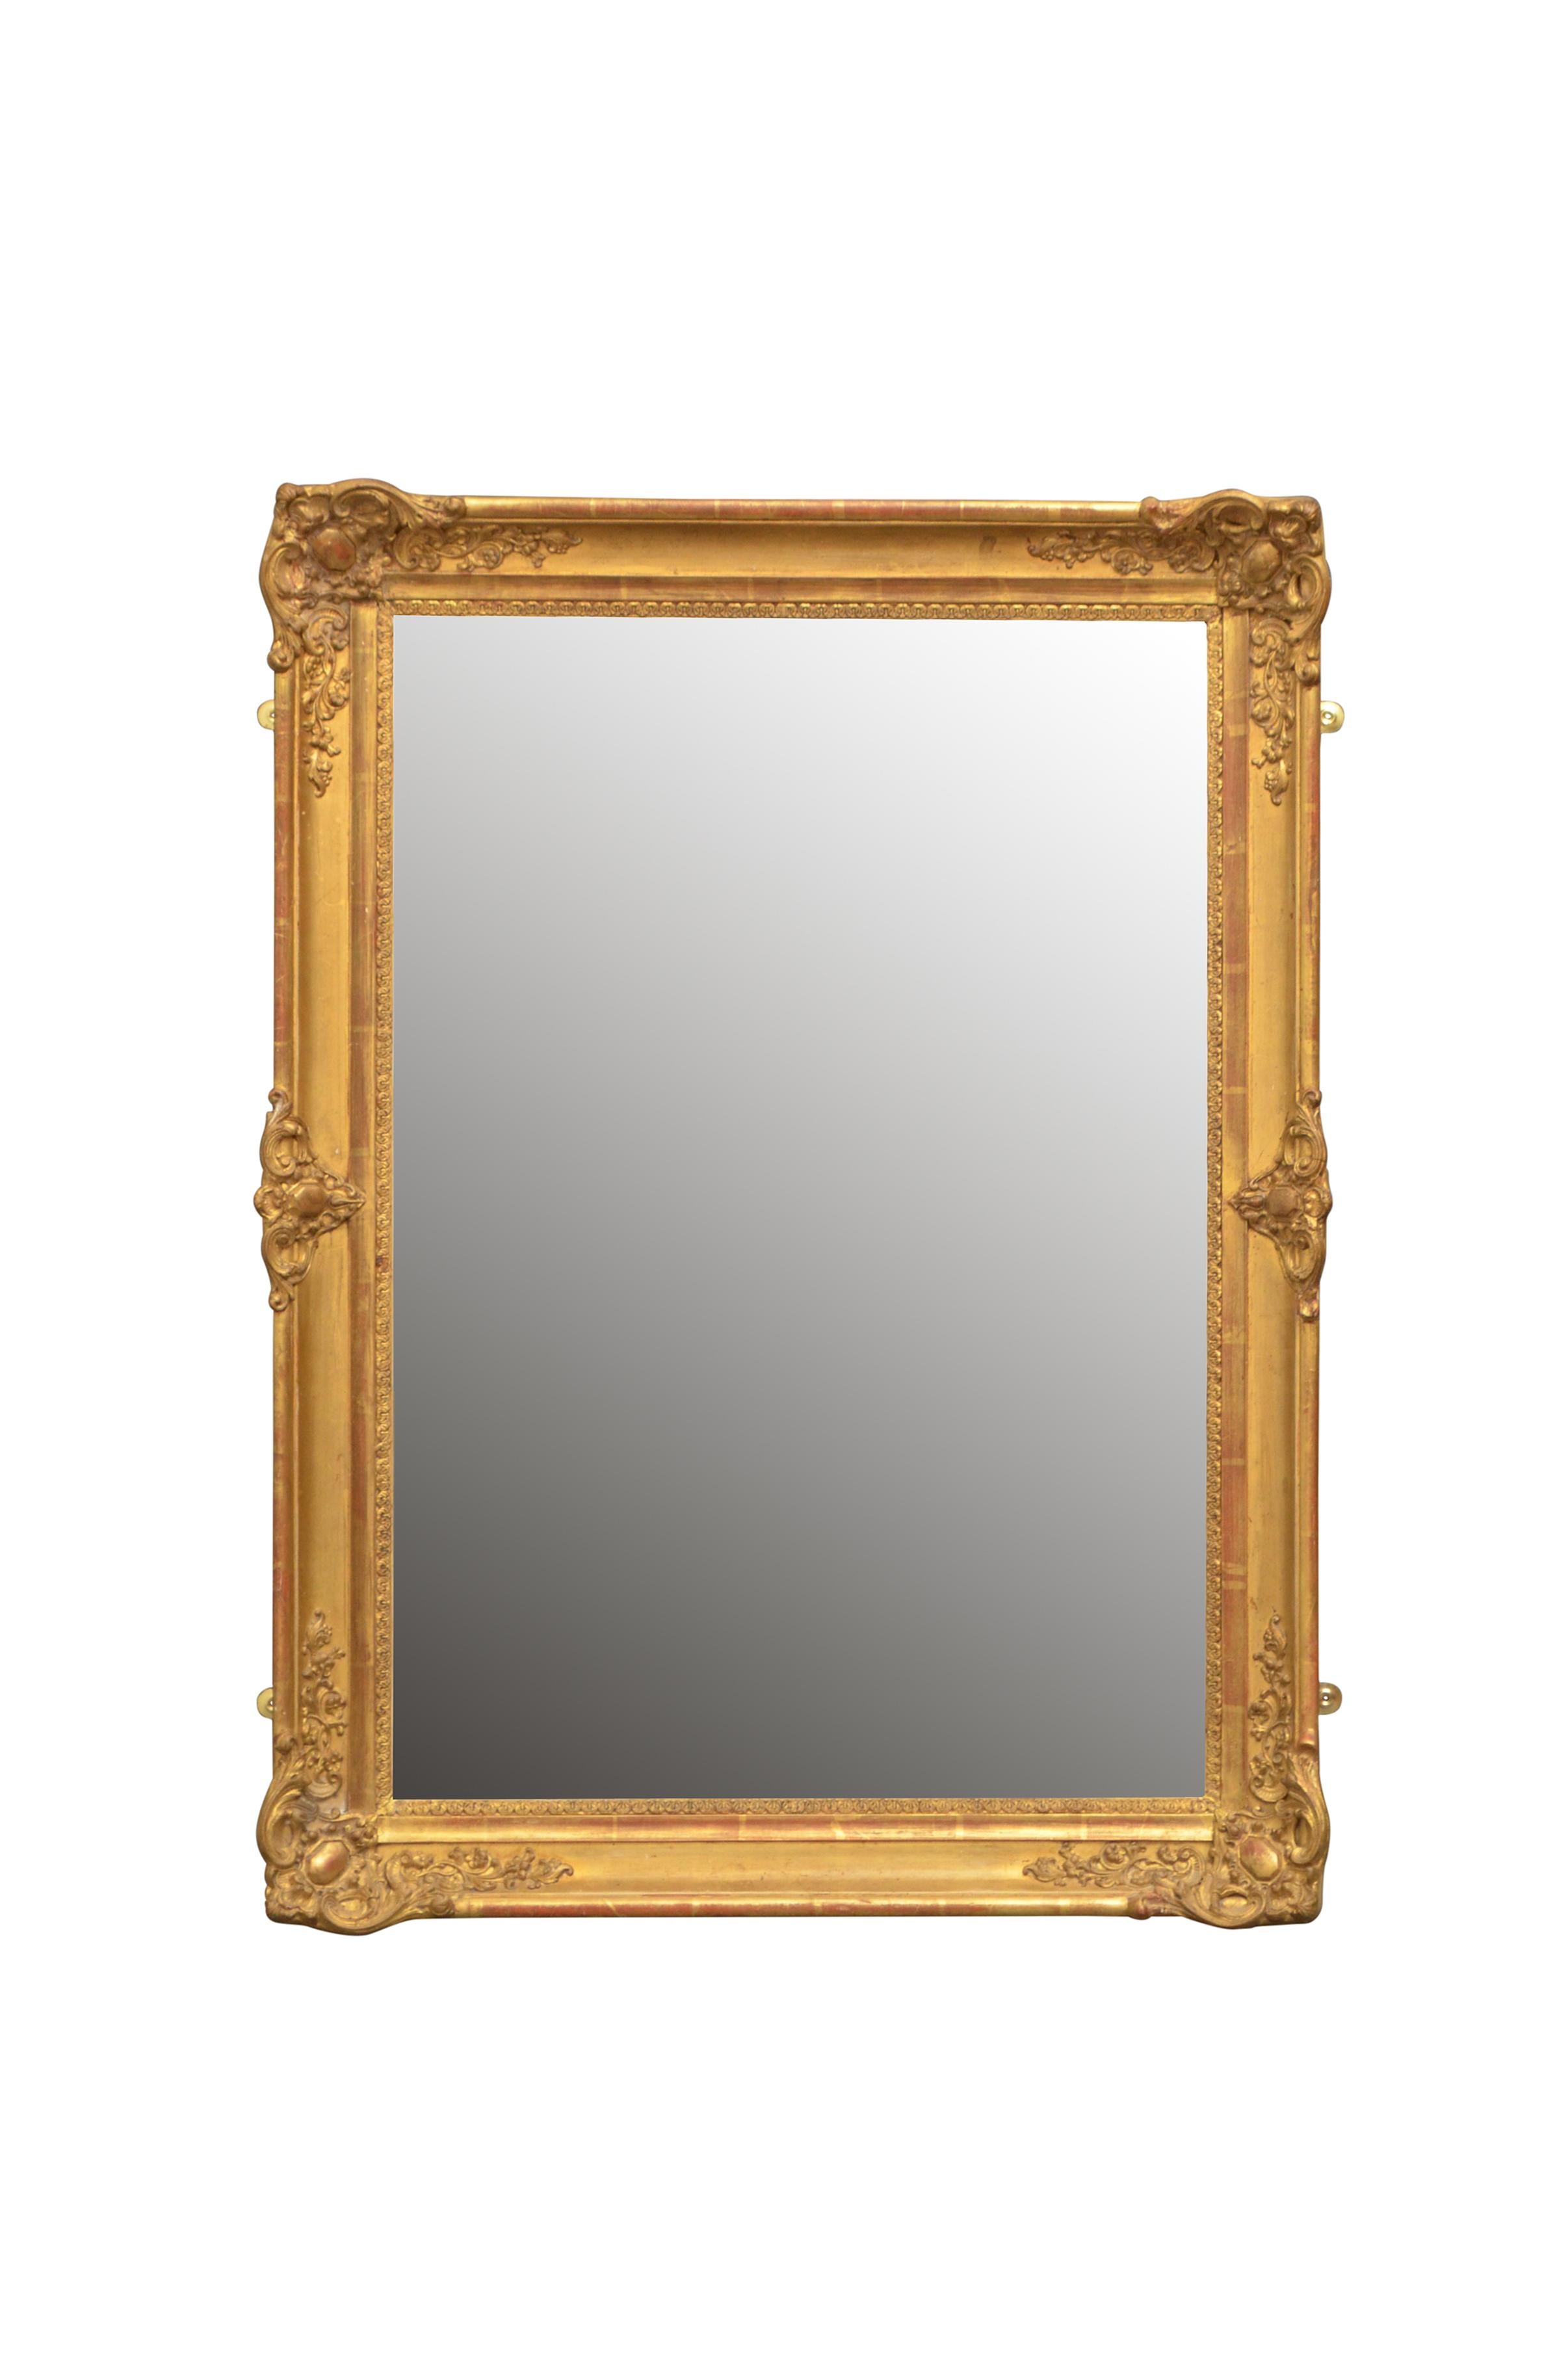 K0435 antique 19th century wall mirror of versatile form could be positioned portrait or landscape, having original mirror plate with some foxing in beautifully carved and gilded frame. This antique gilt mirror retains its original glass and gilt,